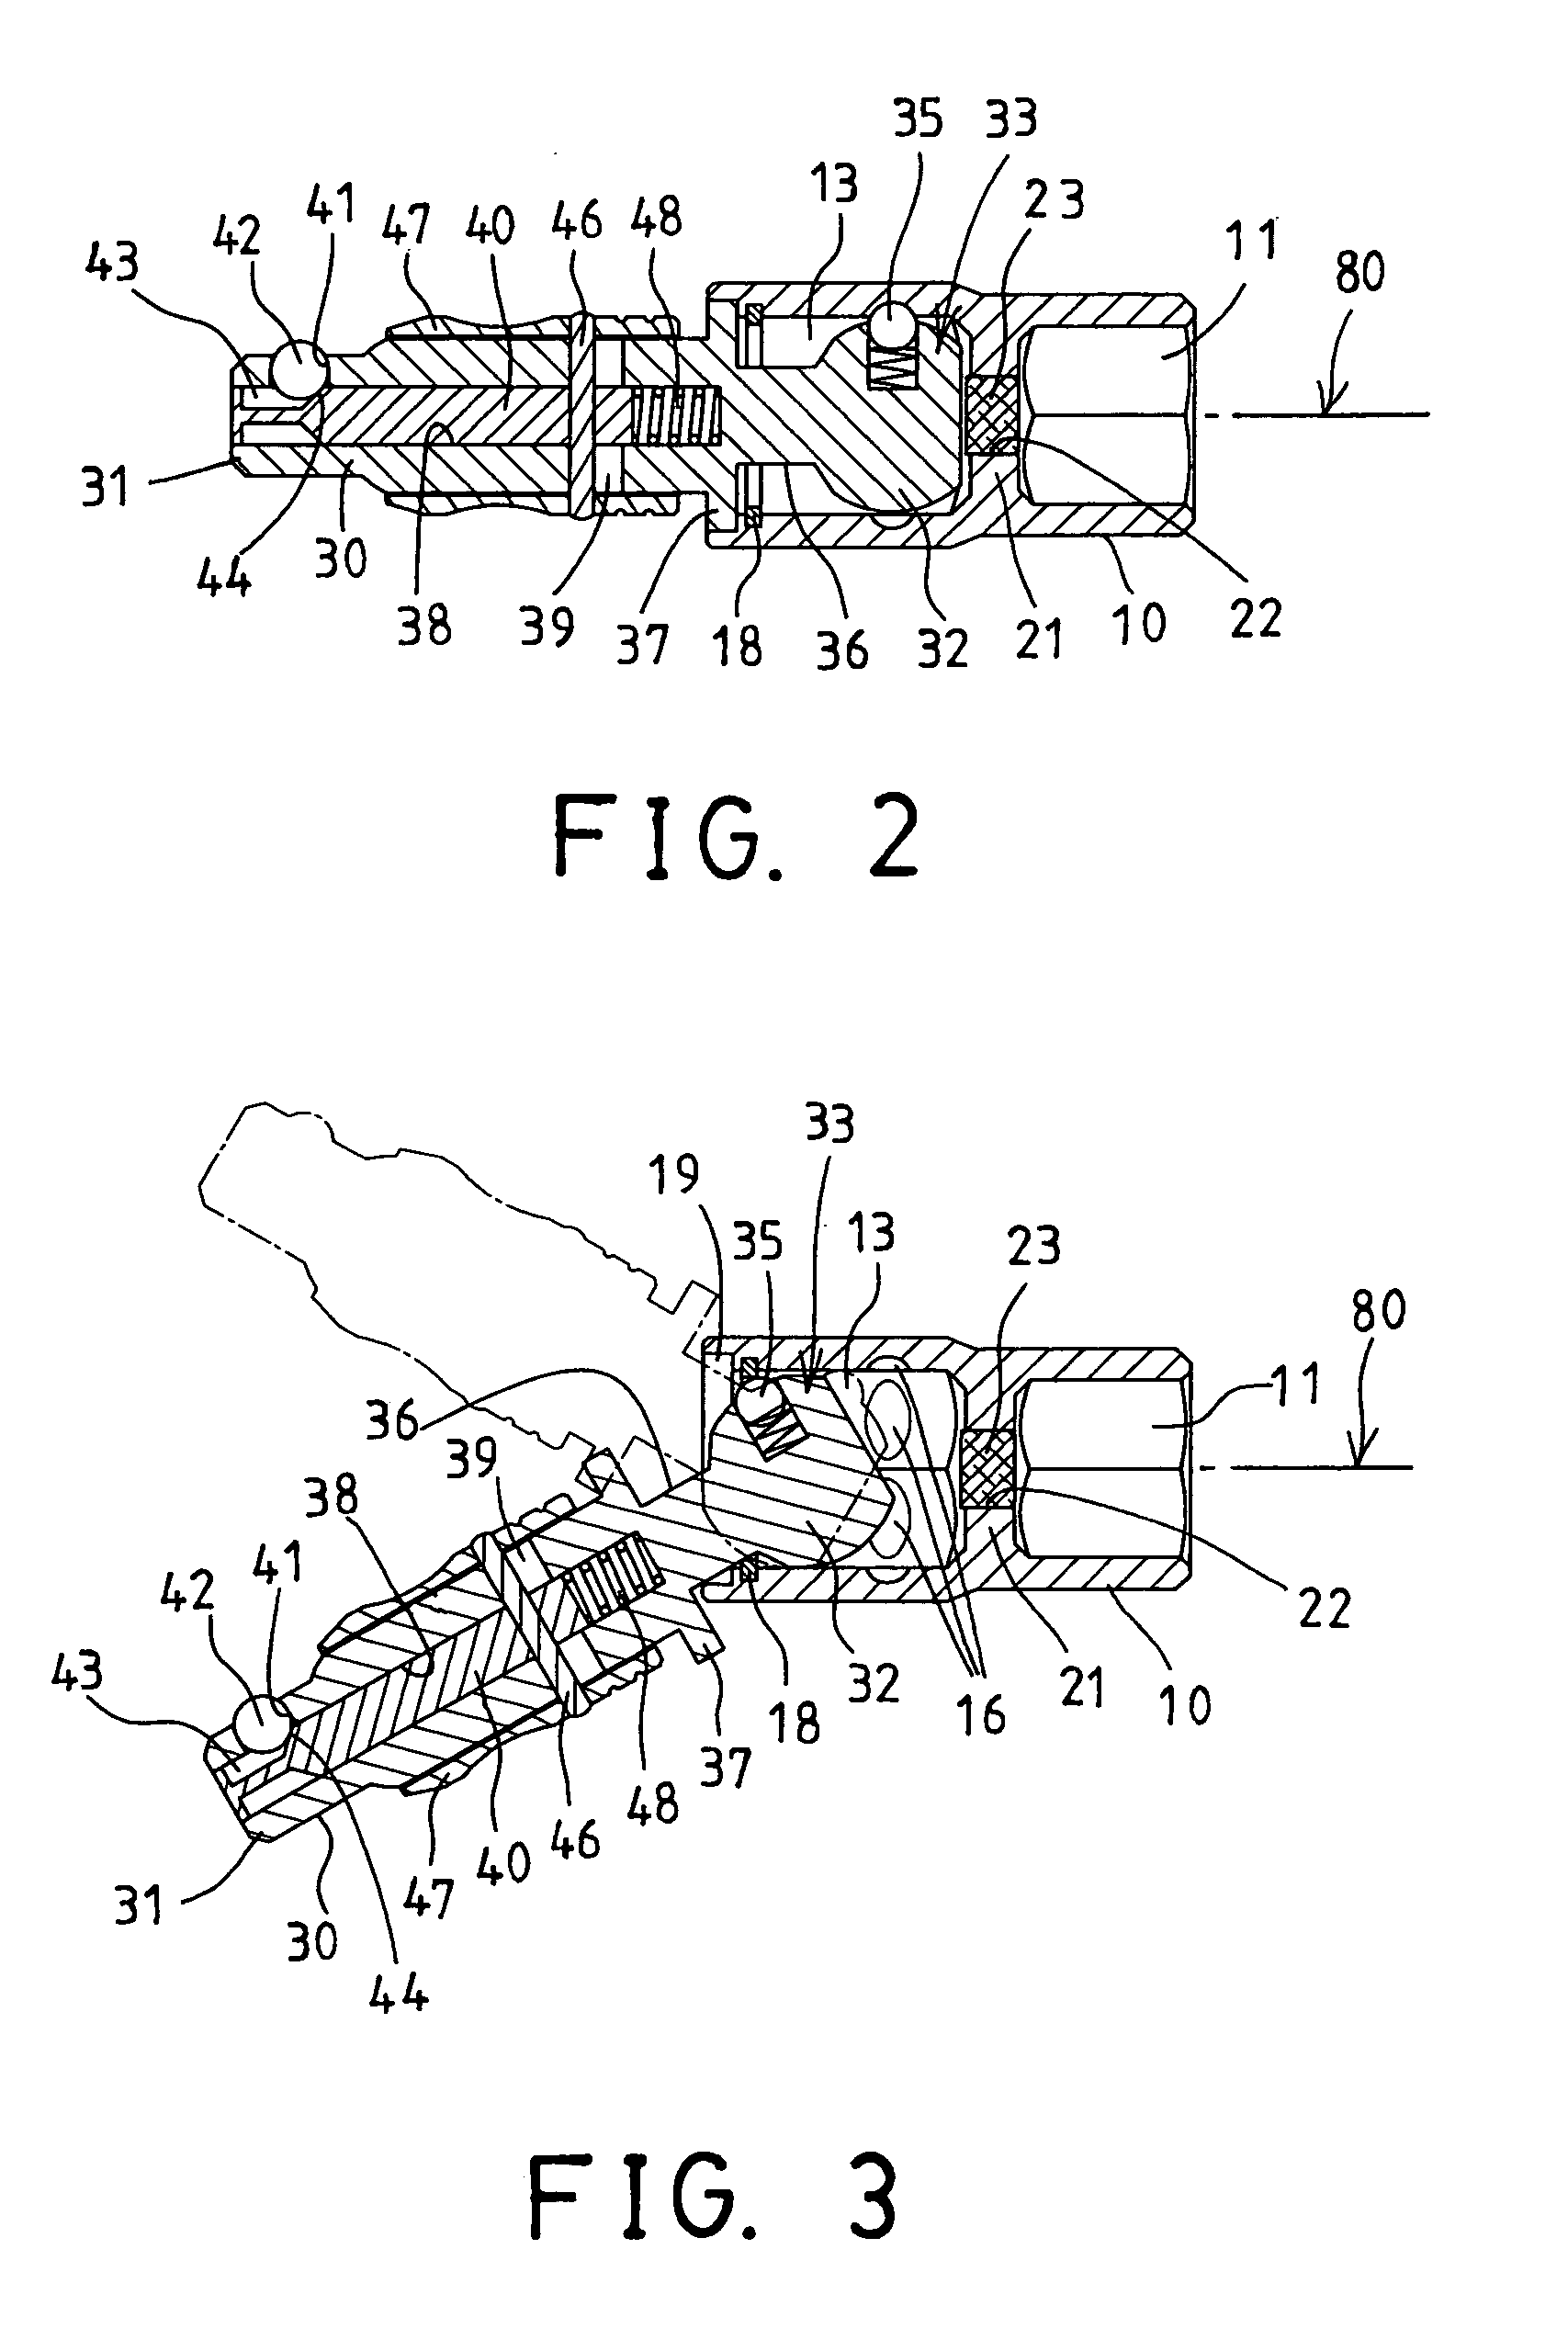 Tool connecting device